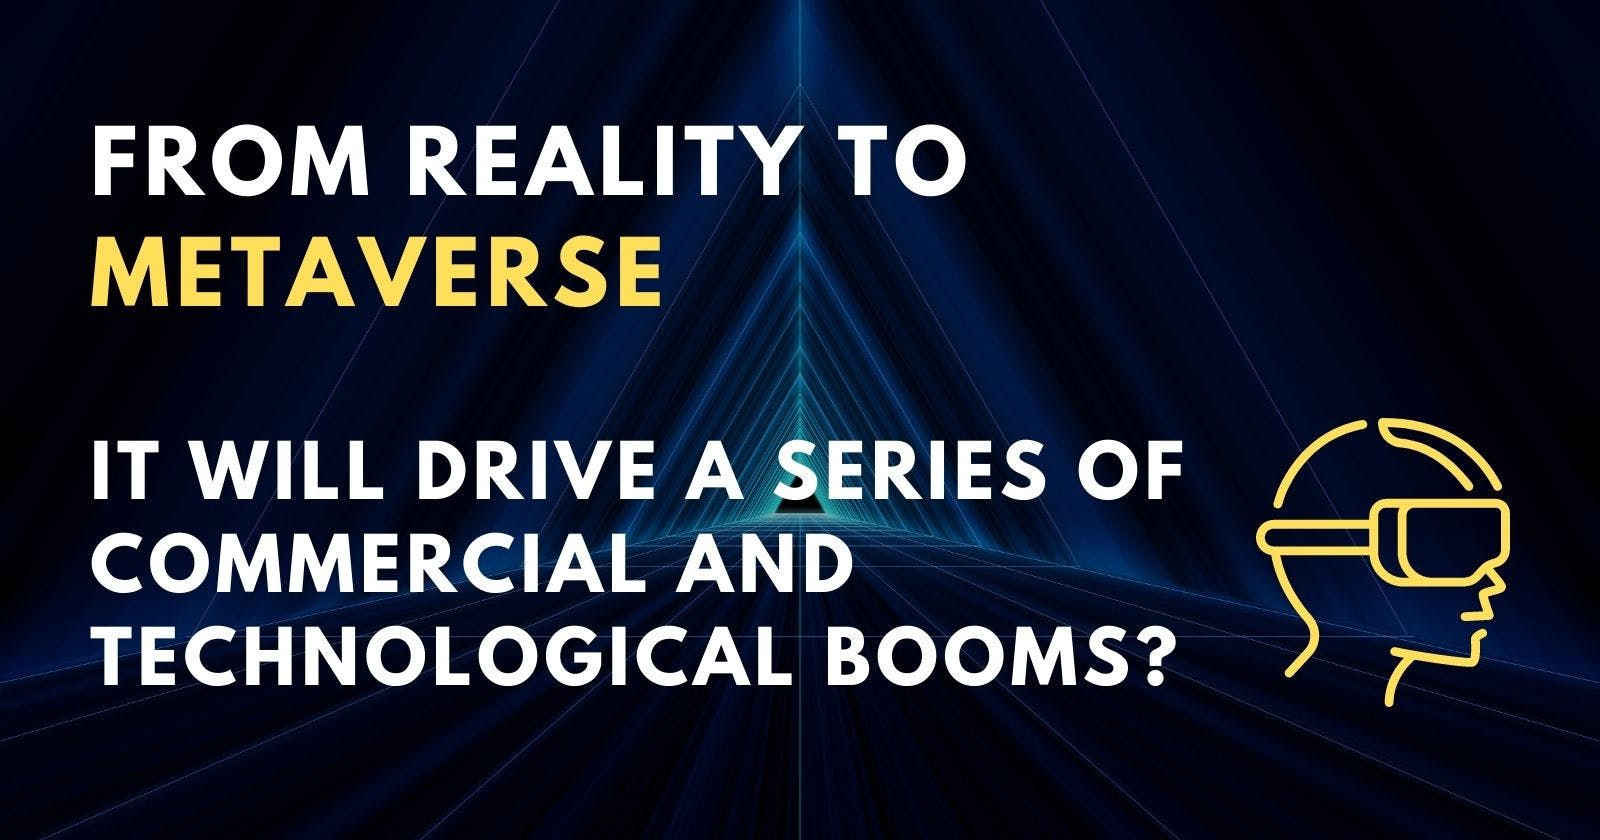 From Reality to Metaverse, it will drive a series of commercial and technological booms?